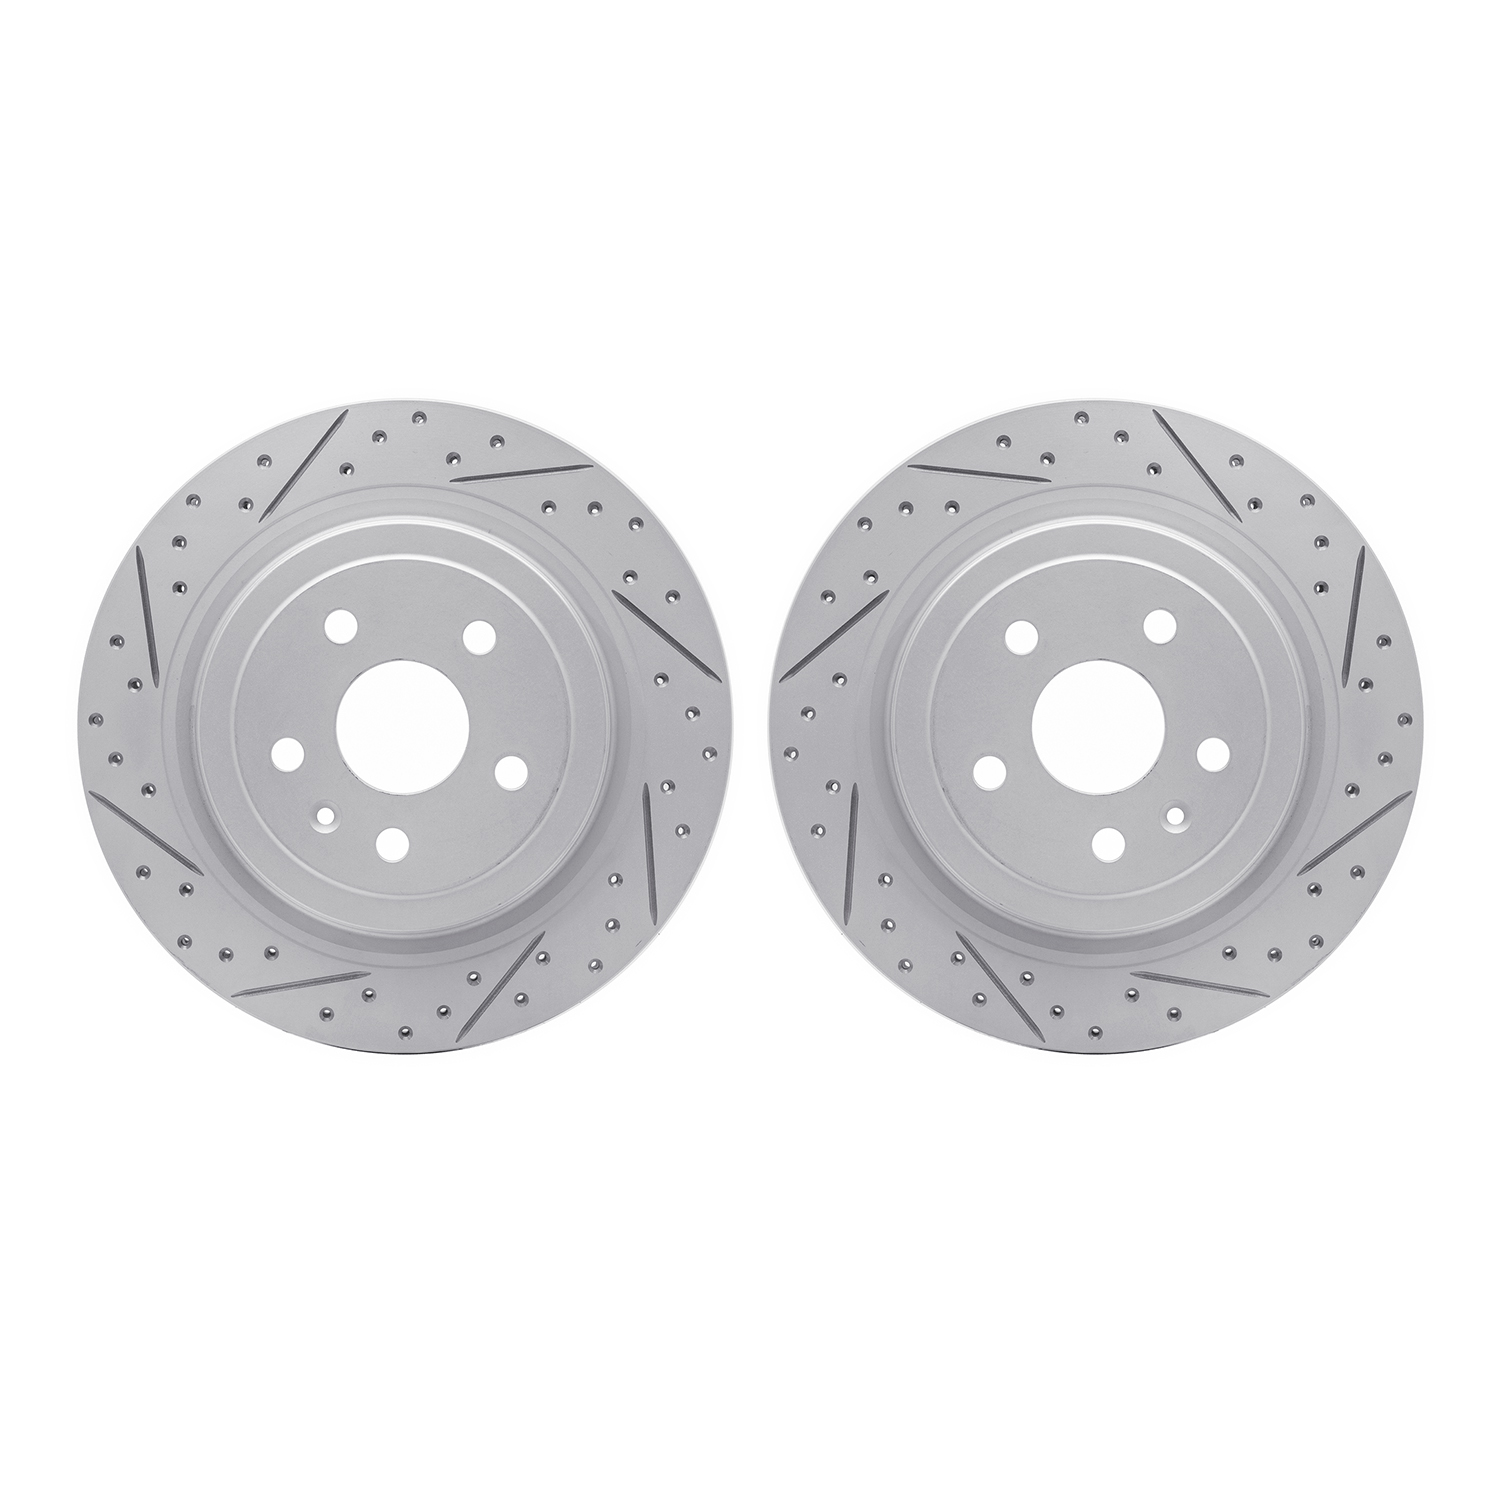 2002-46031 Geoperformance Drilled/Slotted Brake Rotors, 2008-2014 GM, Position: Rear